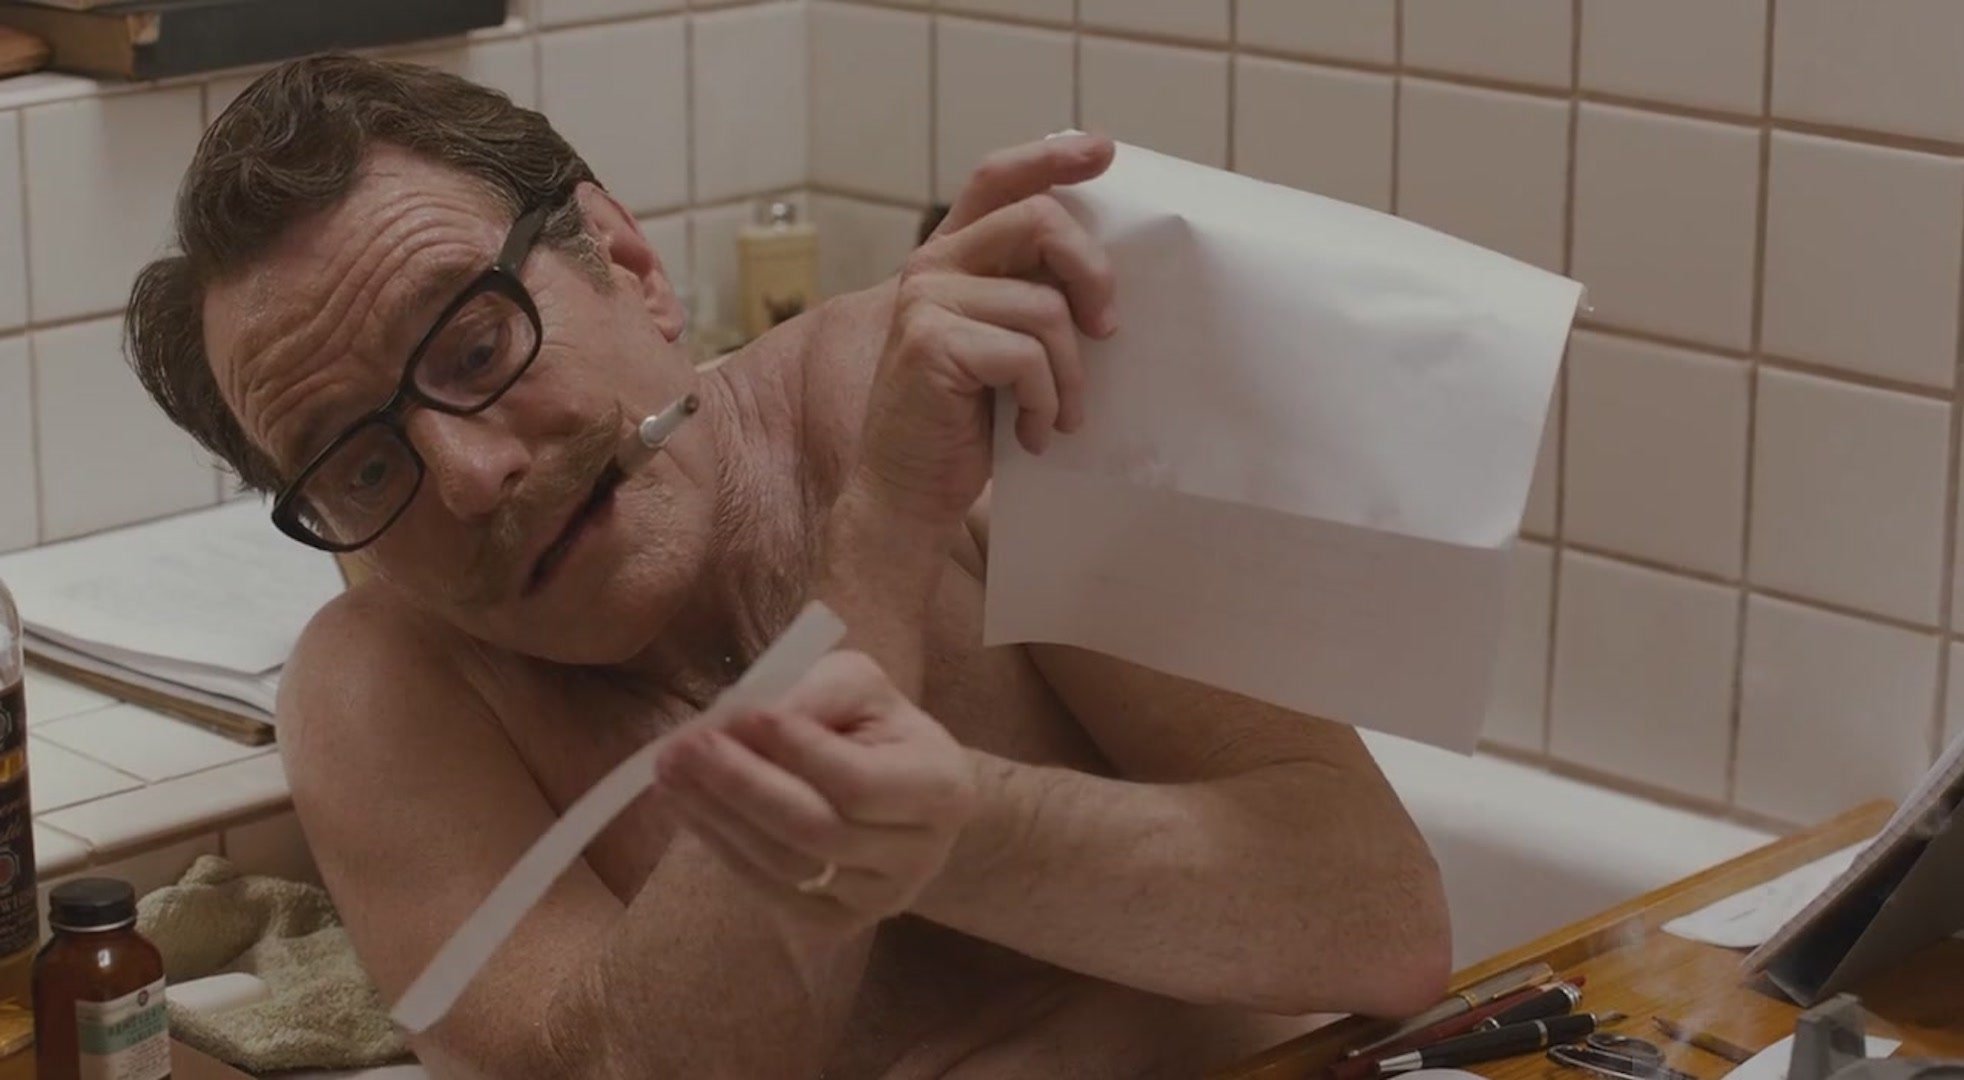 Dalton Trumbo (Bryan Cranston) writing in a bathtub in 'Trumbo' (2015), How You Can Create the Perfect Environment for Screenwriting